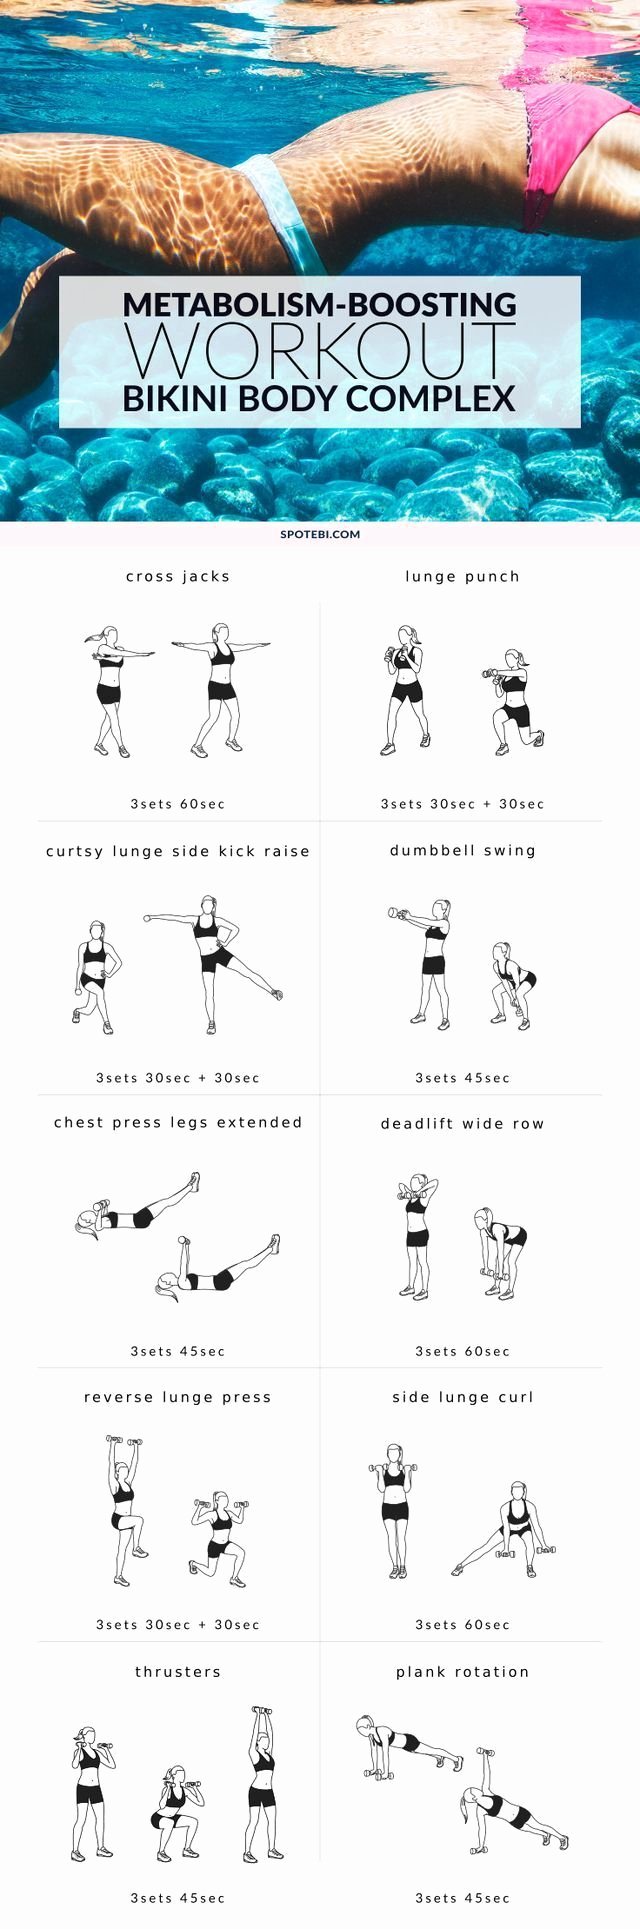 90 Day Workout Plan Awesome 25 Best Ideas About 90 Day Workout Plan On Pinterest